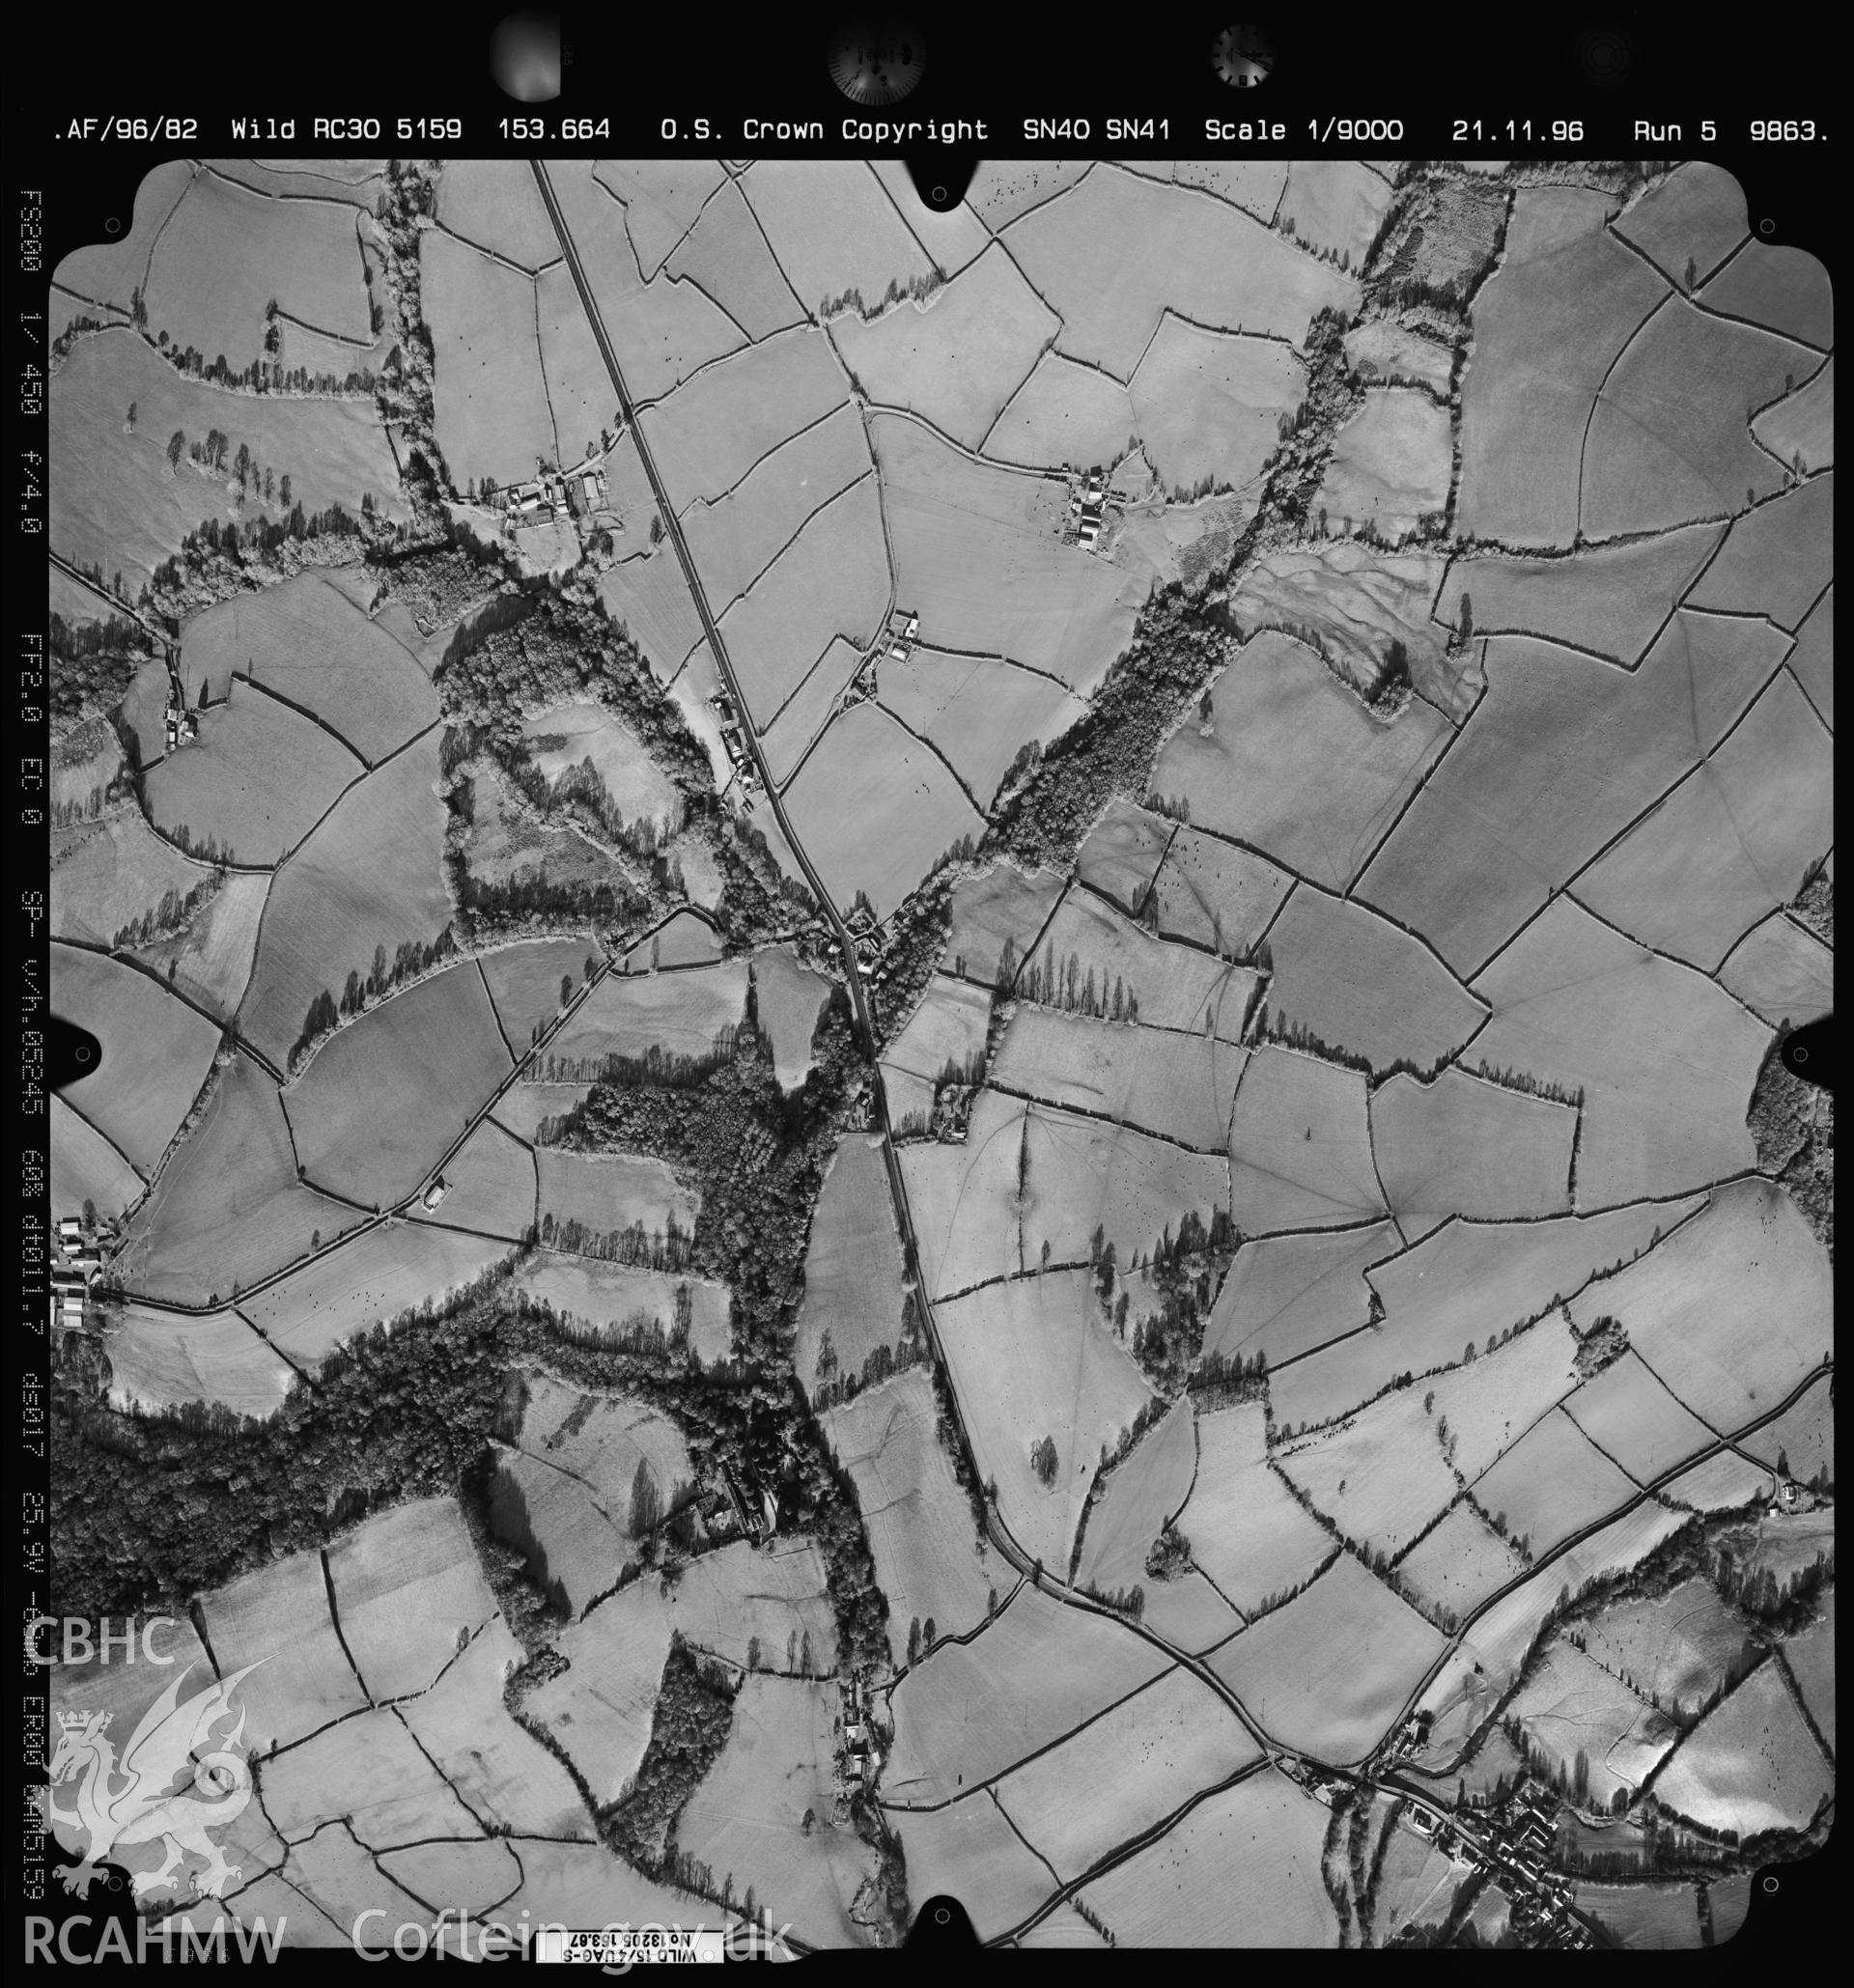 Digitized copy of an aerial photograph showing Cloigyn area, Carmarthenshire, taken by Ordnance Survey, 1999